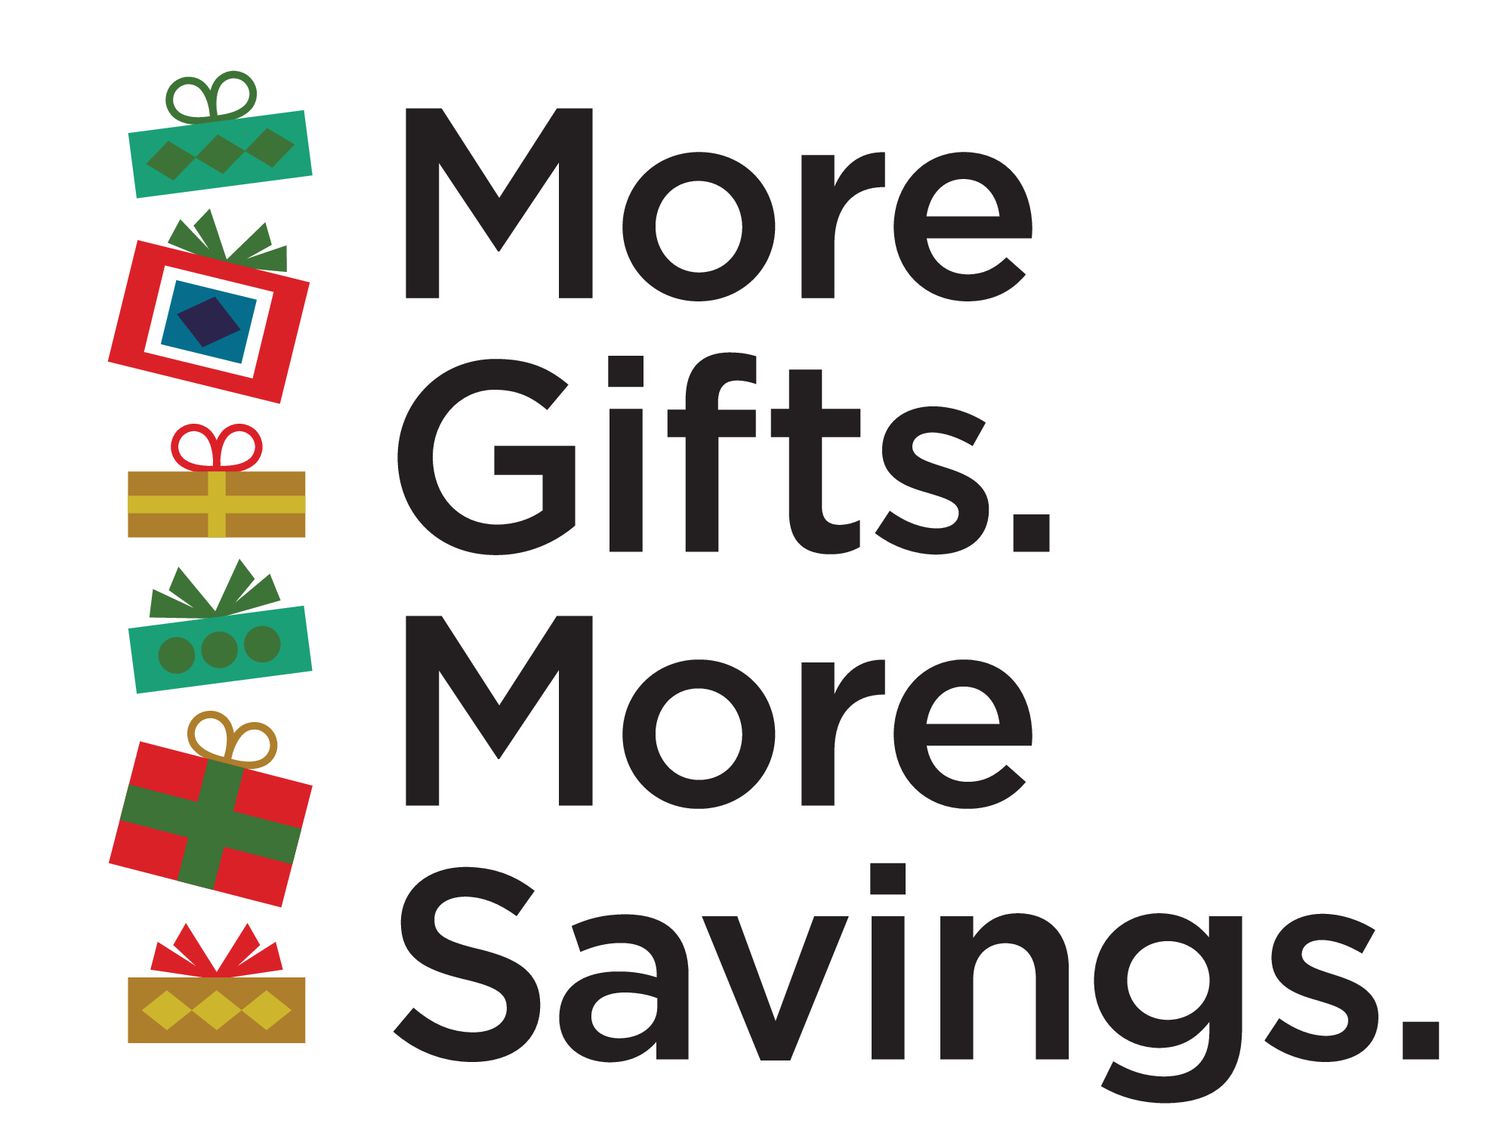 https://corporate.kohls.com/content/dam/kohlscorp/news/2022/november/holiday-campaign/More%20gifts%20More%20savings%20Med%20w-Gifts%20VT%20HEX.jpg